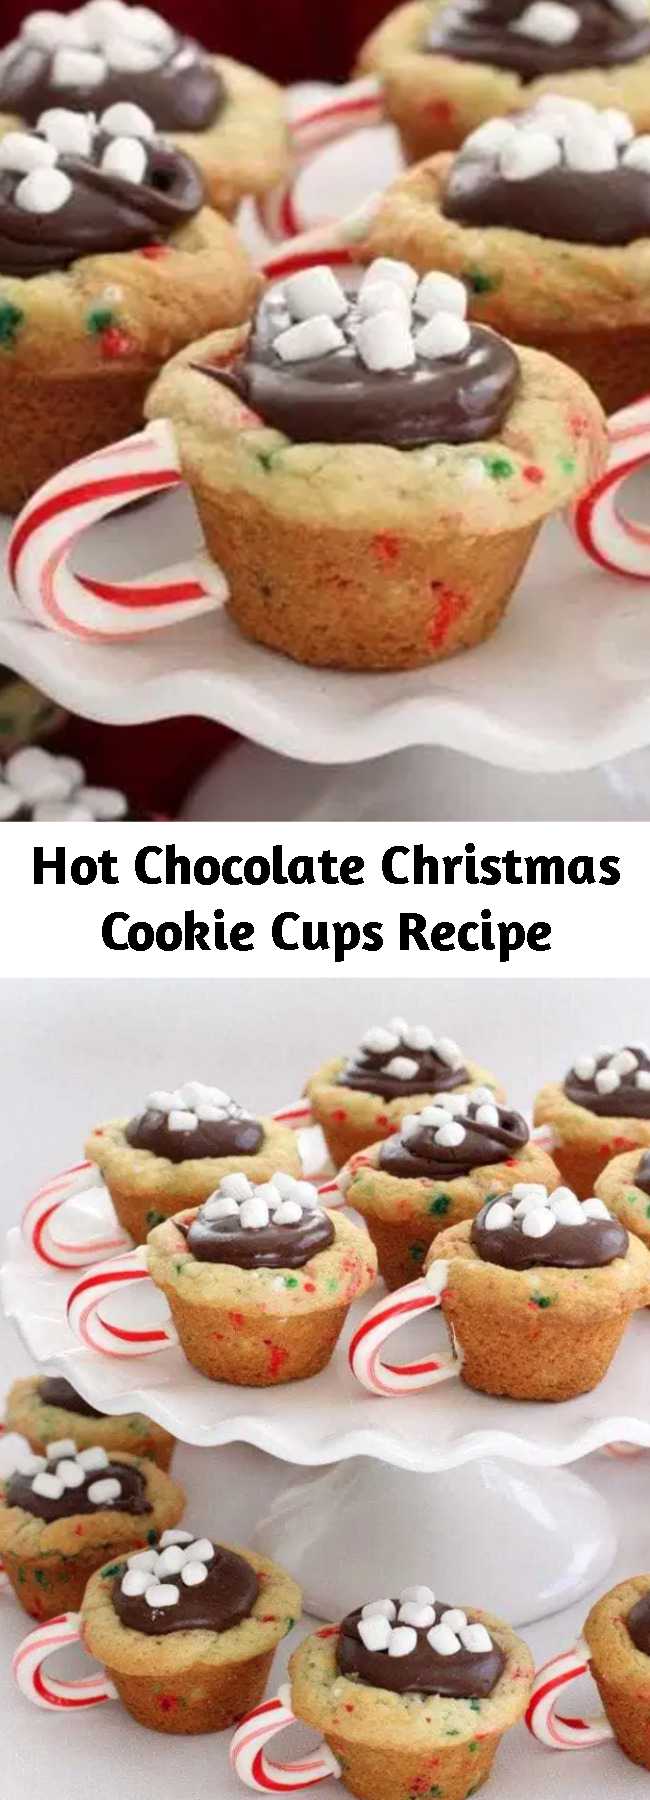 Hot Chocolate Christmas Cookie Cups Recipe - Hot Chocolate Cookie Cups are the most fun & festive Christmas cookies ever! Sugar cookie cups filled with fudge, mini marshmallows & sprinkles with a darling candy cane handle!